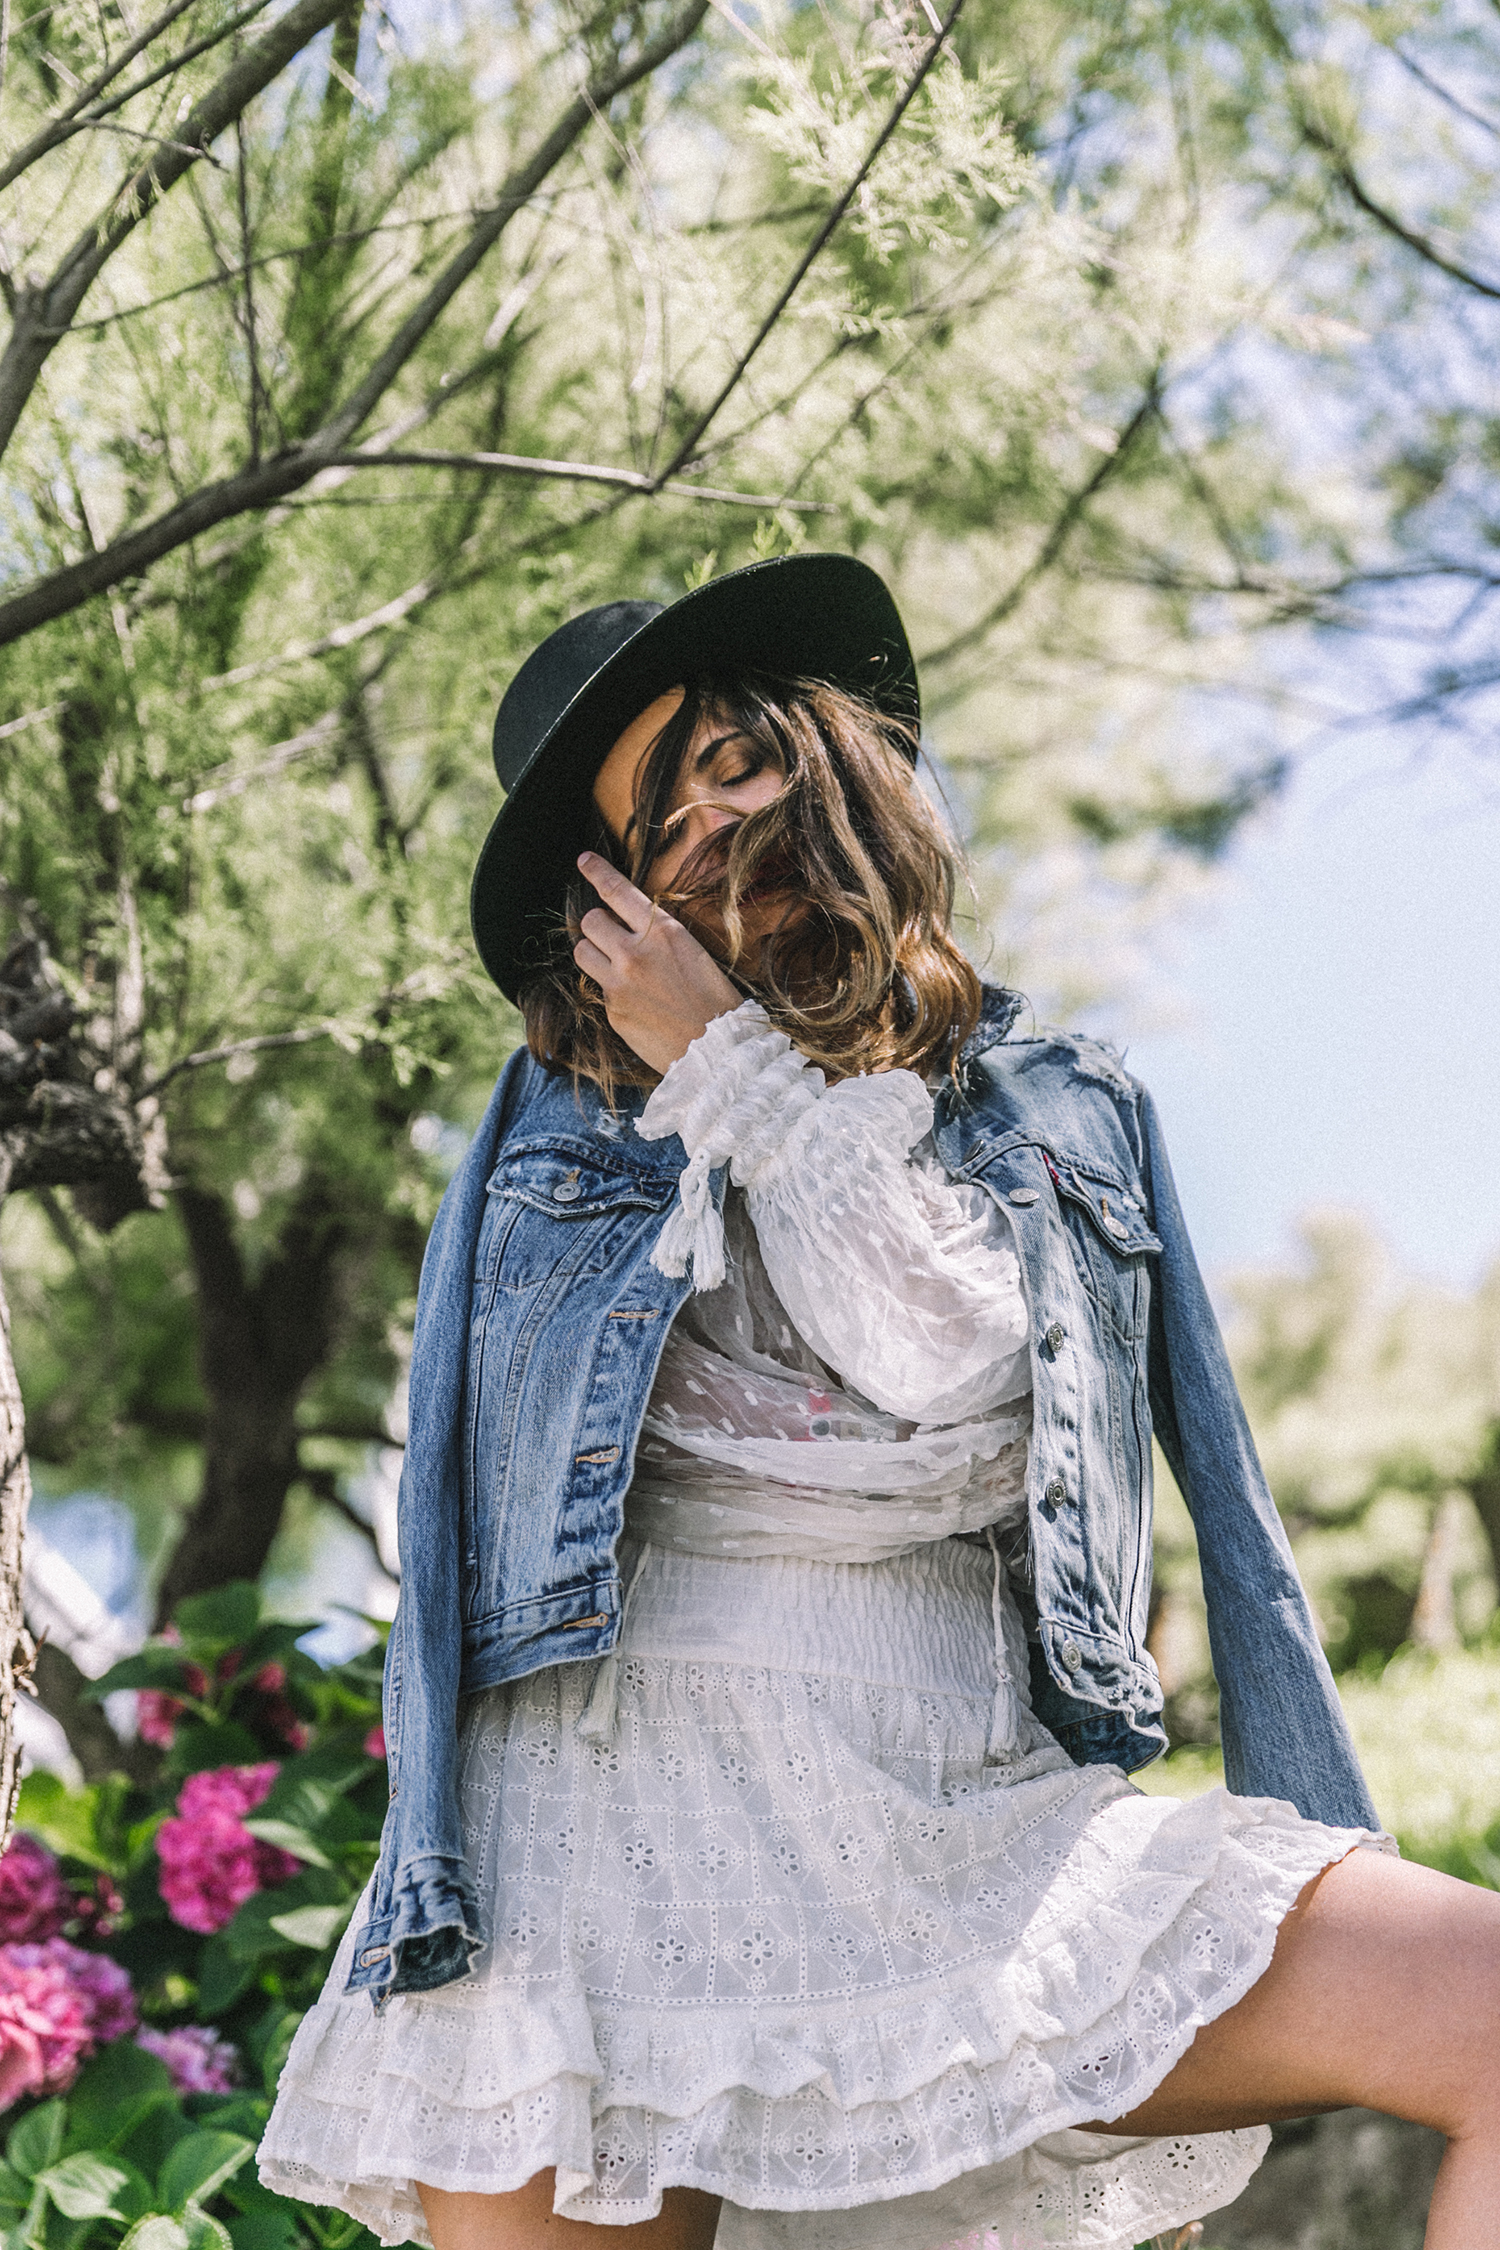 White_Outfit-Denim_Jacket-Lack_Of_Color_Hat-Outfit-Biarritz-Levis-Live_In_Levis-Street_Style-Summer-Boho_Skirt-Collage_Vintage-52